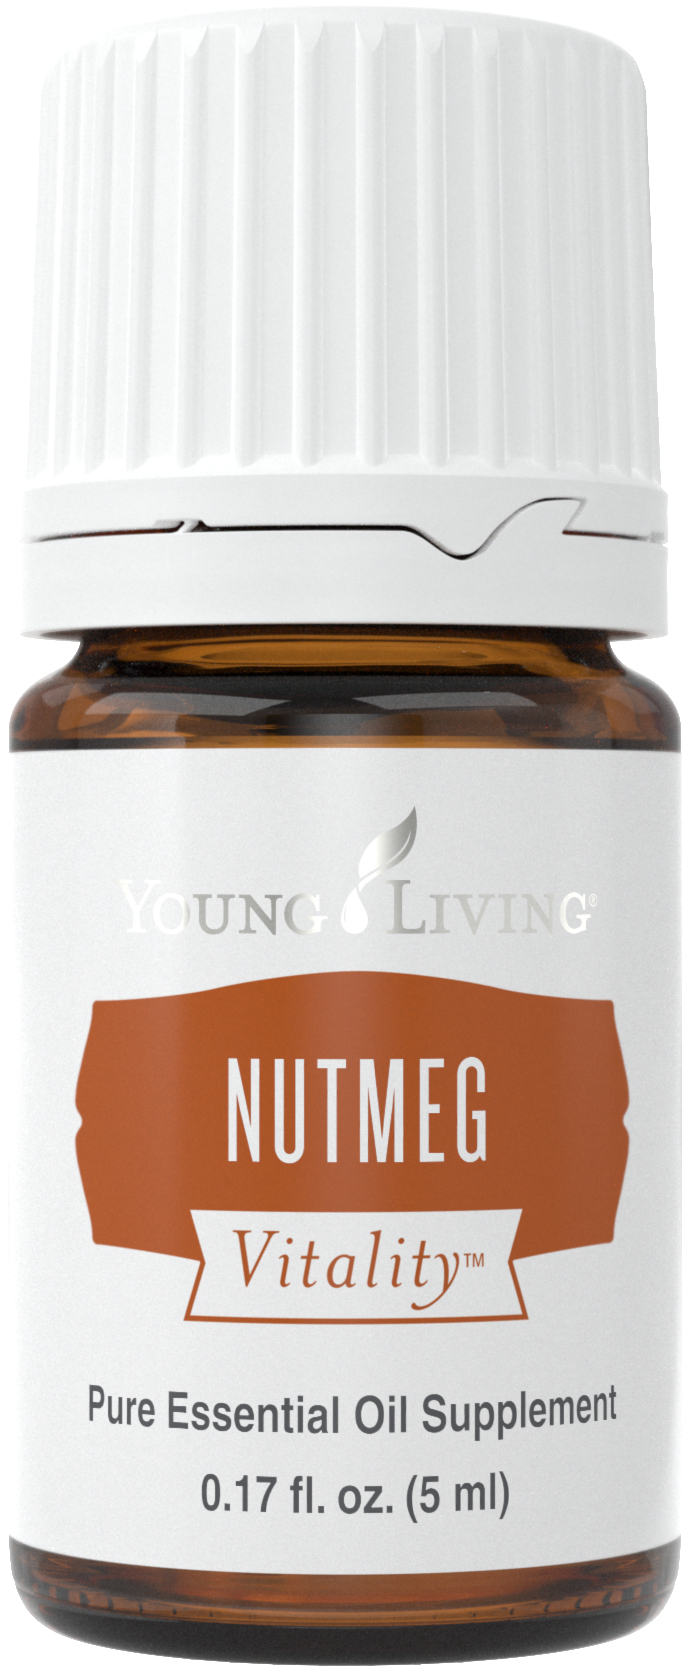 Nutmeg Vitality - Young Living Essential Oils 